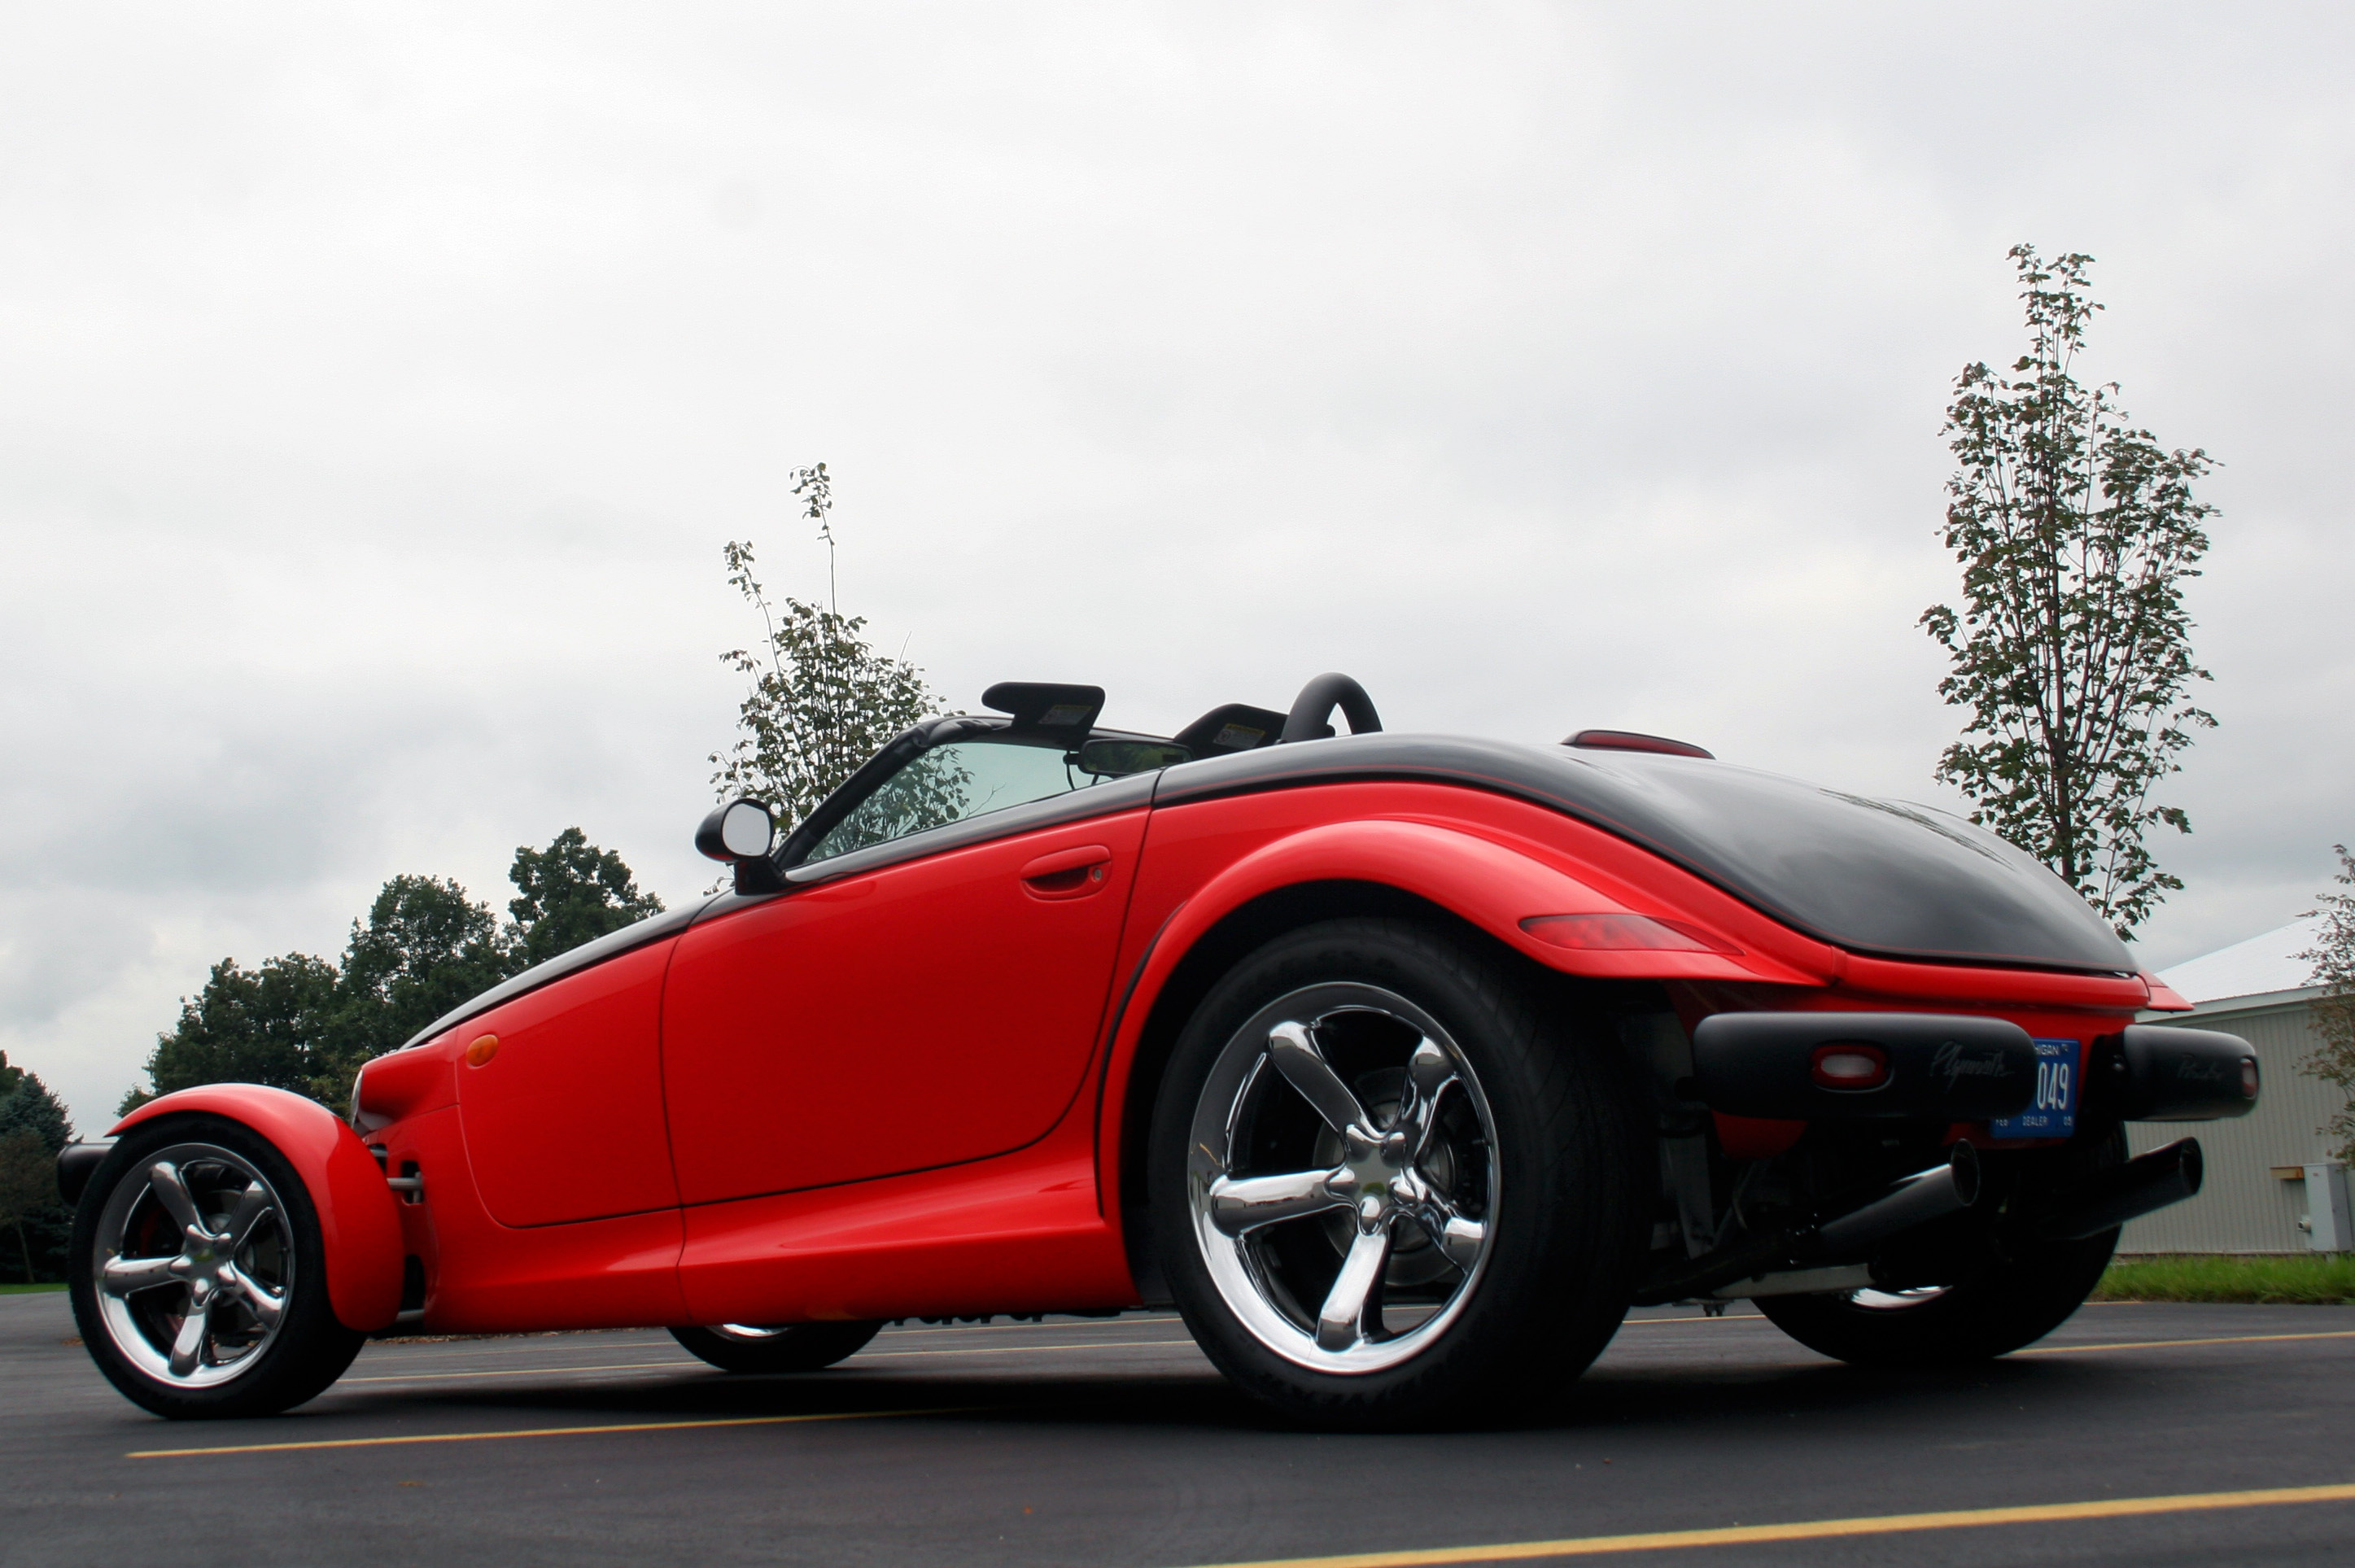 Plymouth Prowler, 1971 Road Runner, Plymouth engine, 2900x1930 HD Desktop